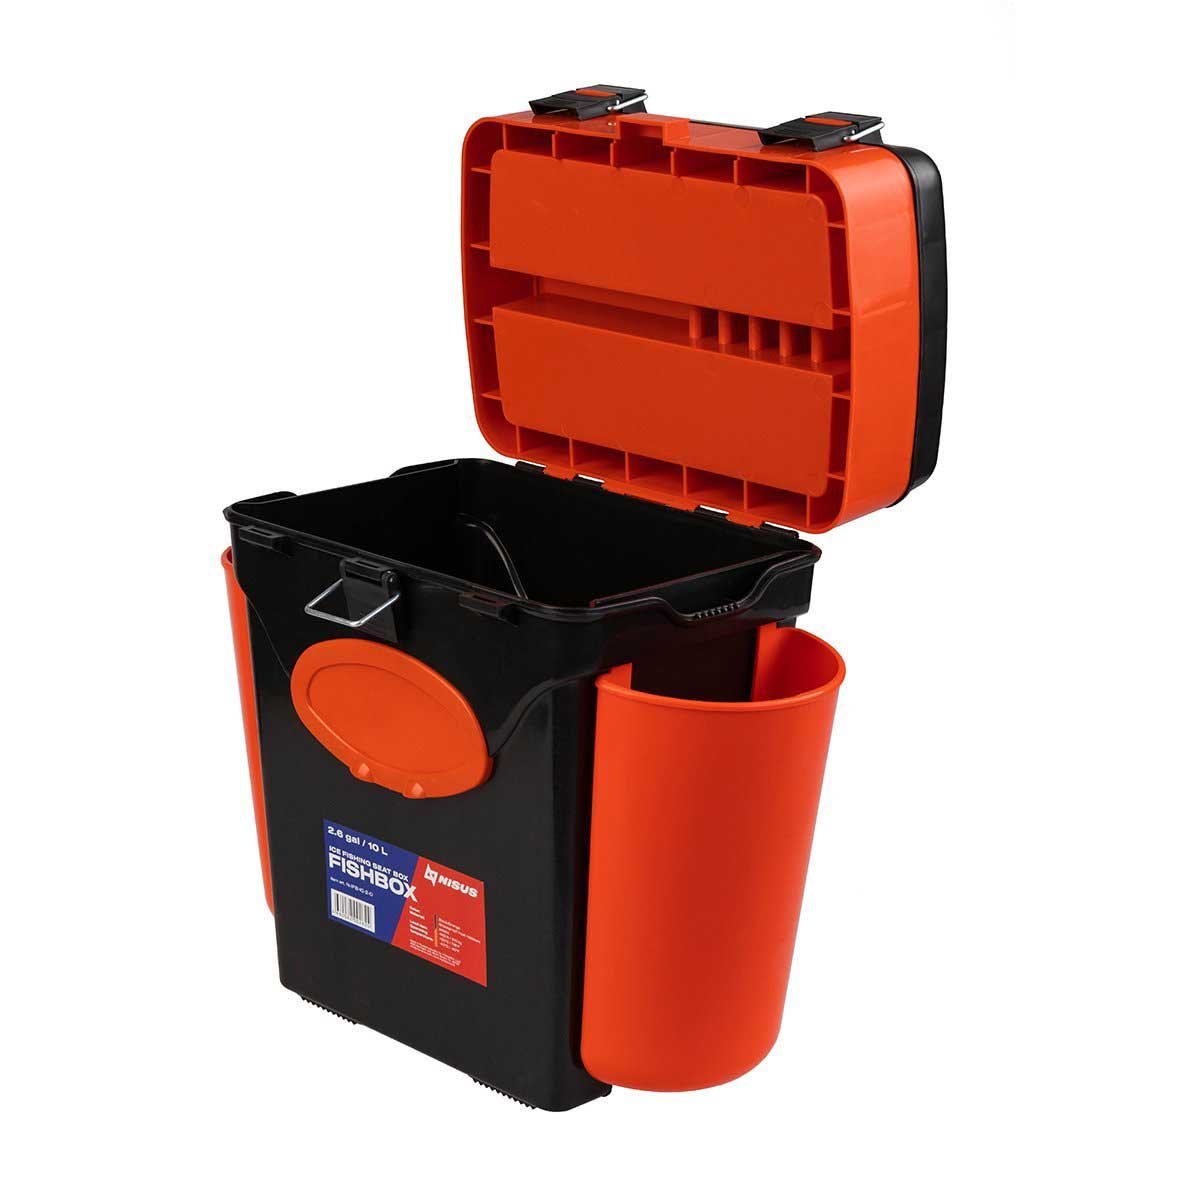 FishBox 10 liter SeatBox for Ice Fishing has 2 compartments for tackle storage